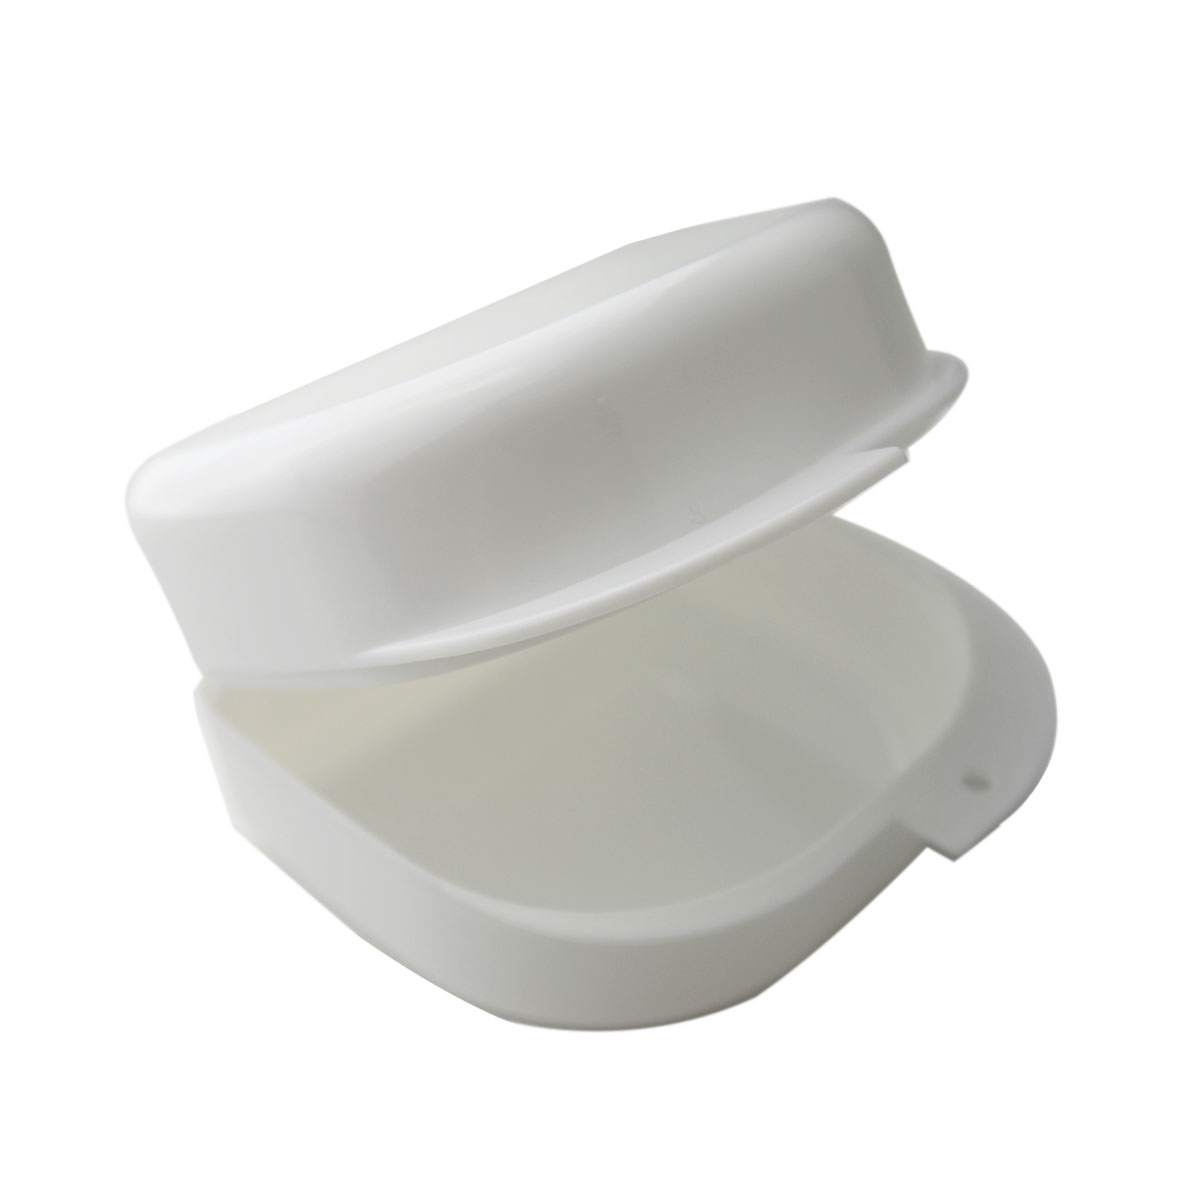 Grin365 Large Retainer Case for Retainer, Mouth Guard, or Mouth Tray - White Color